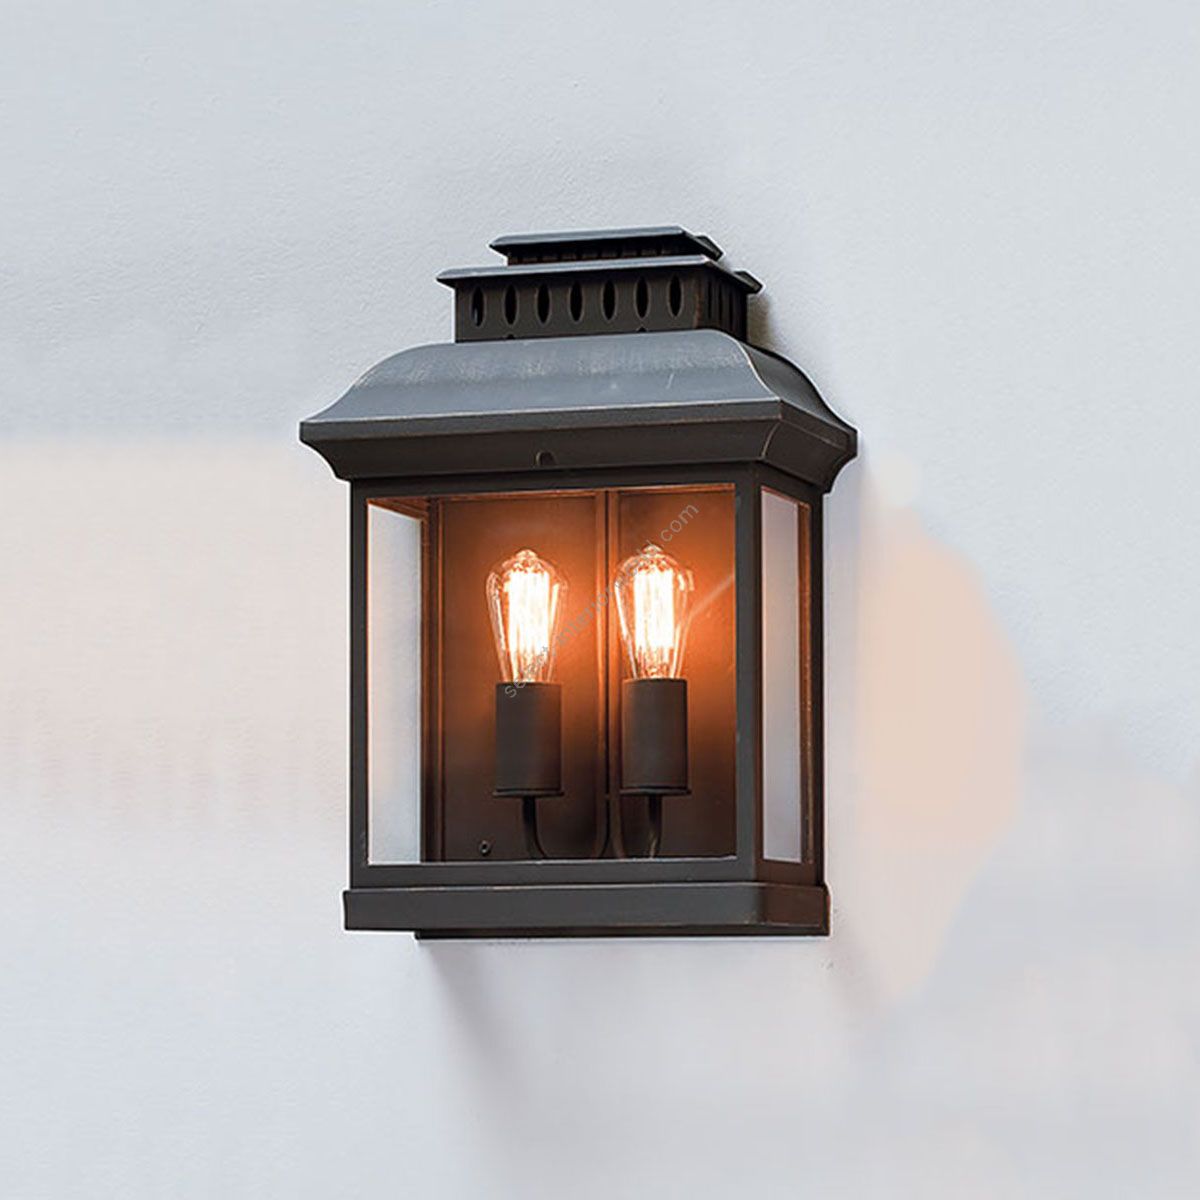 Classic 2-light Wrought Iron Outdoor Wall Lantern by Robers